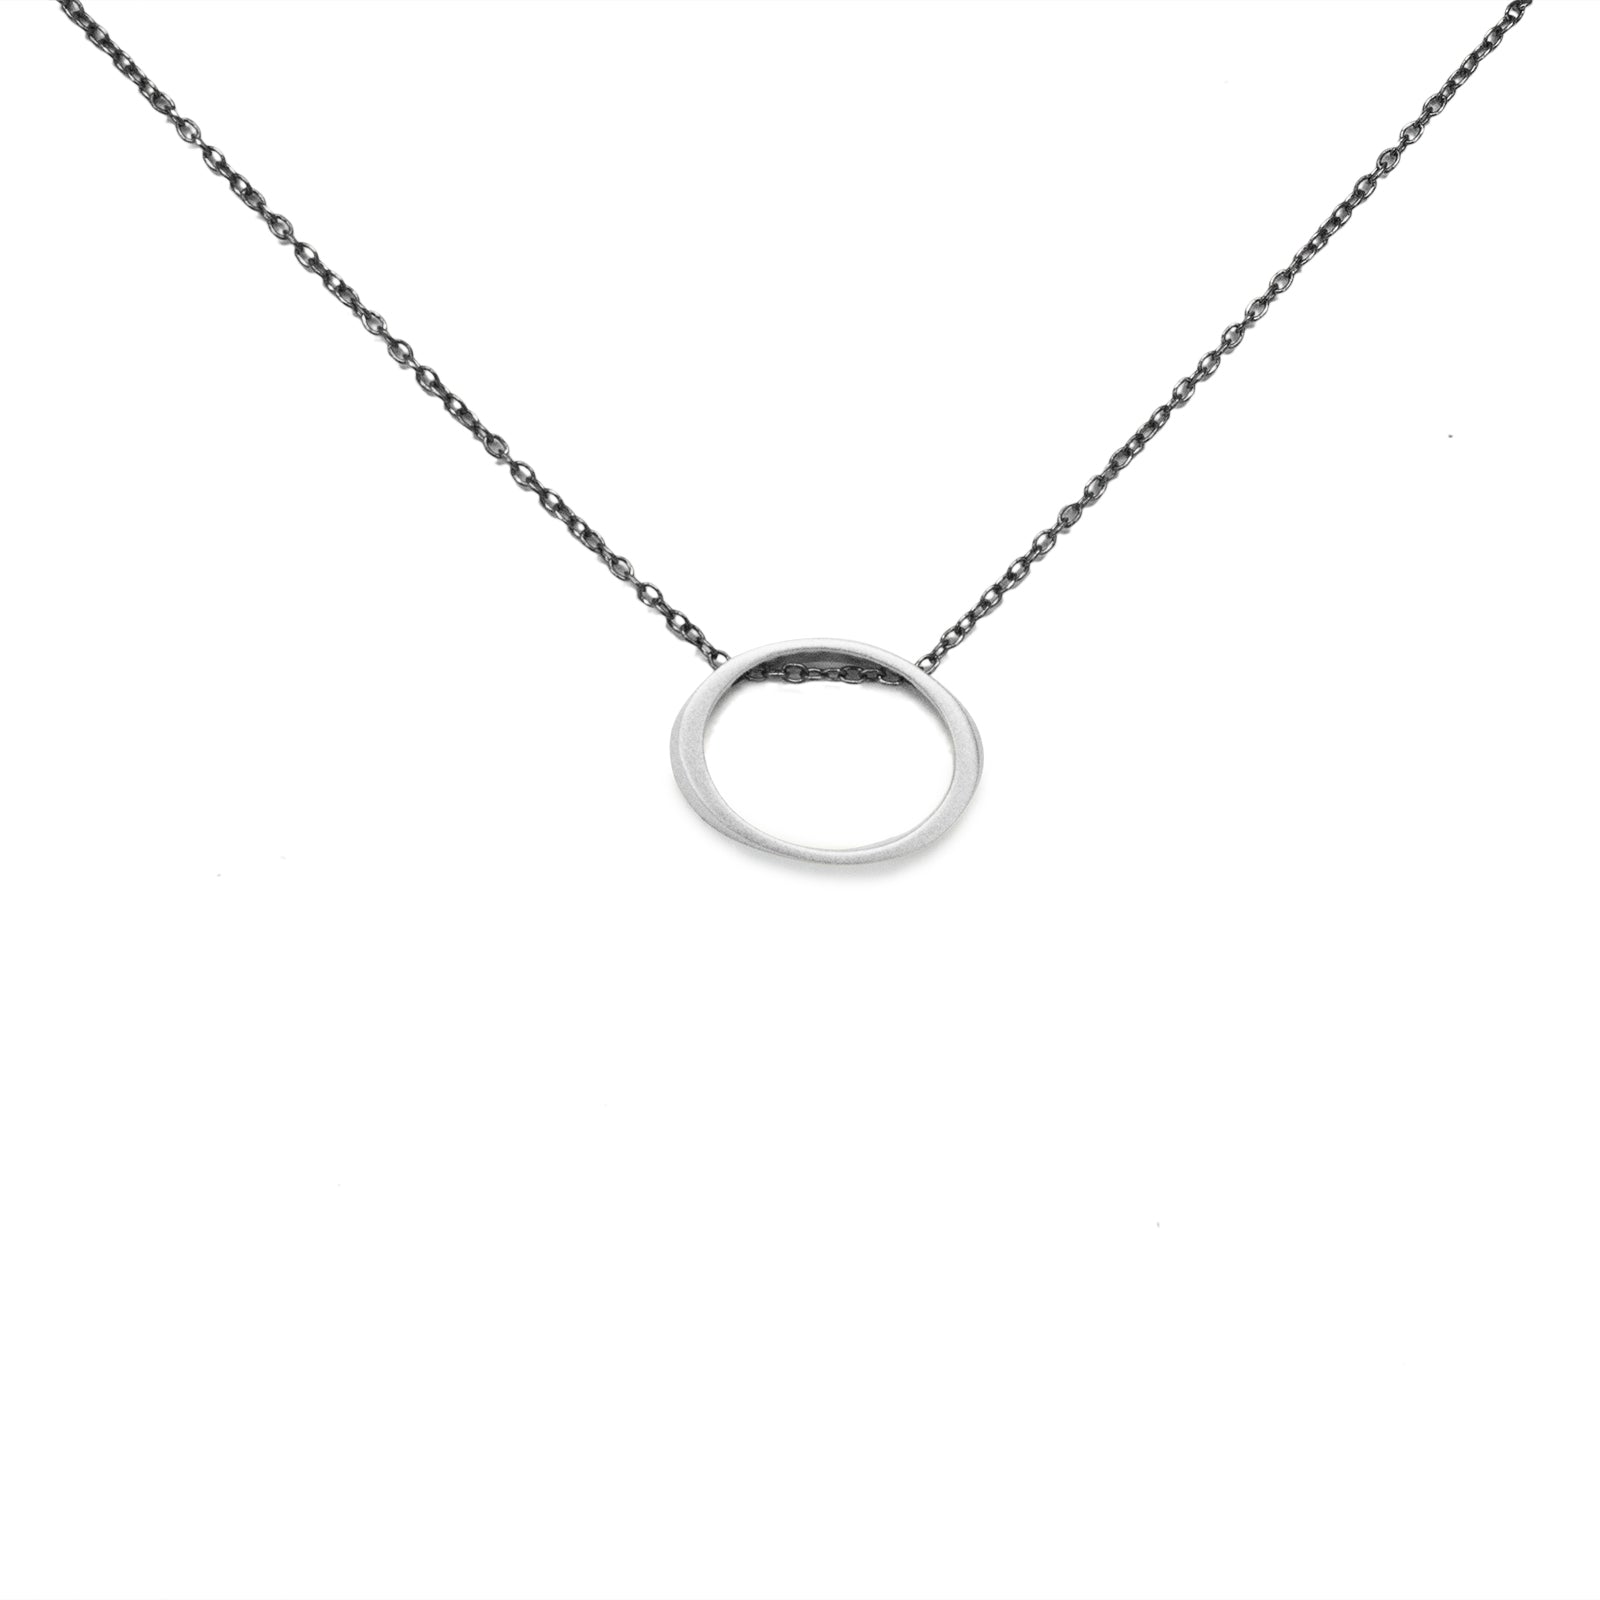 sterling silver floating torque pendant